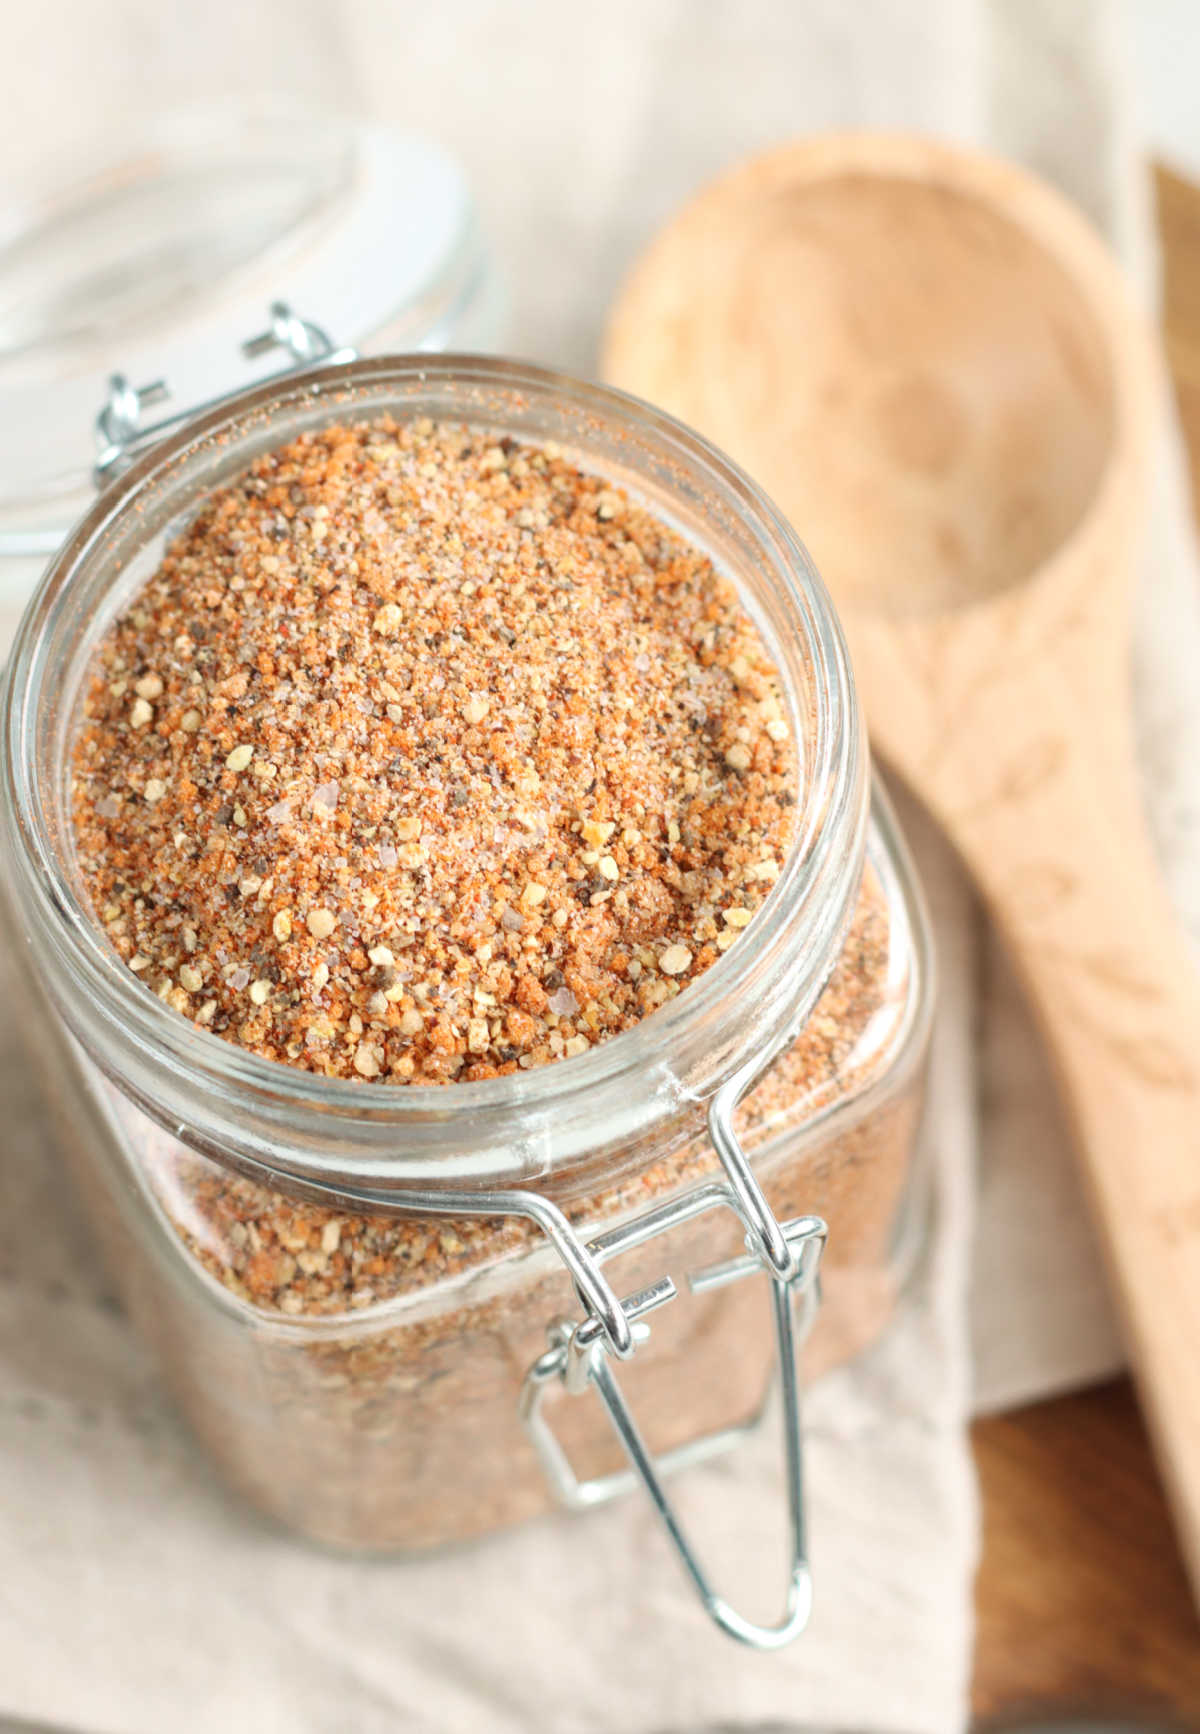 Square glass jar with BBQ spice rub, wooden tablespoon in background.